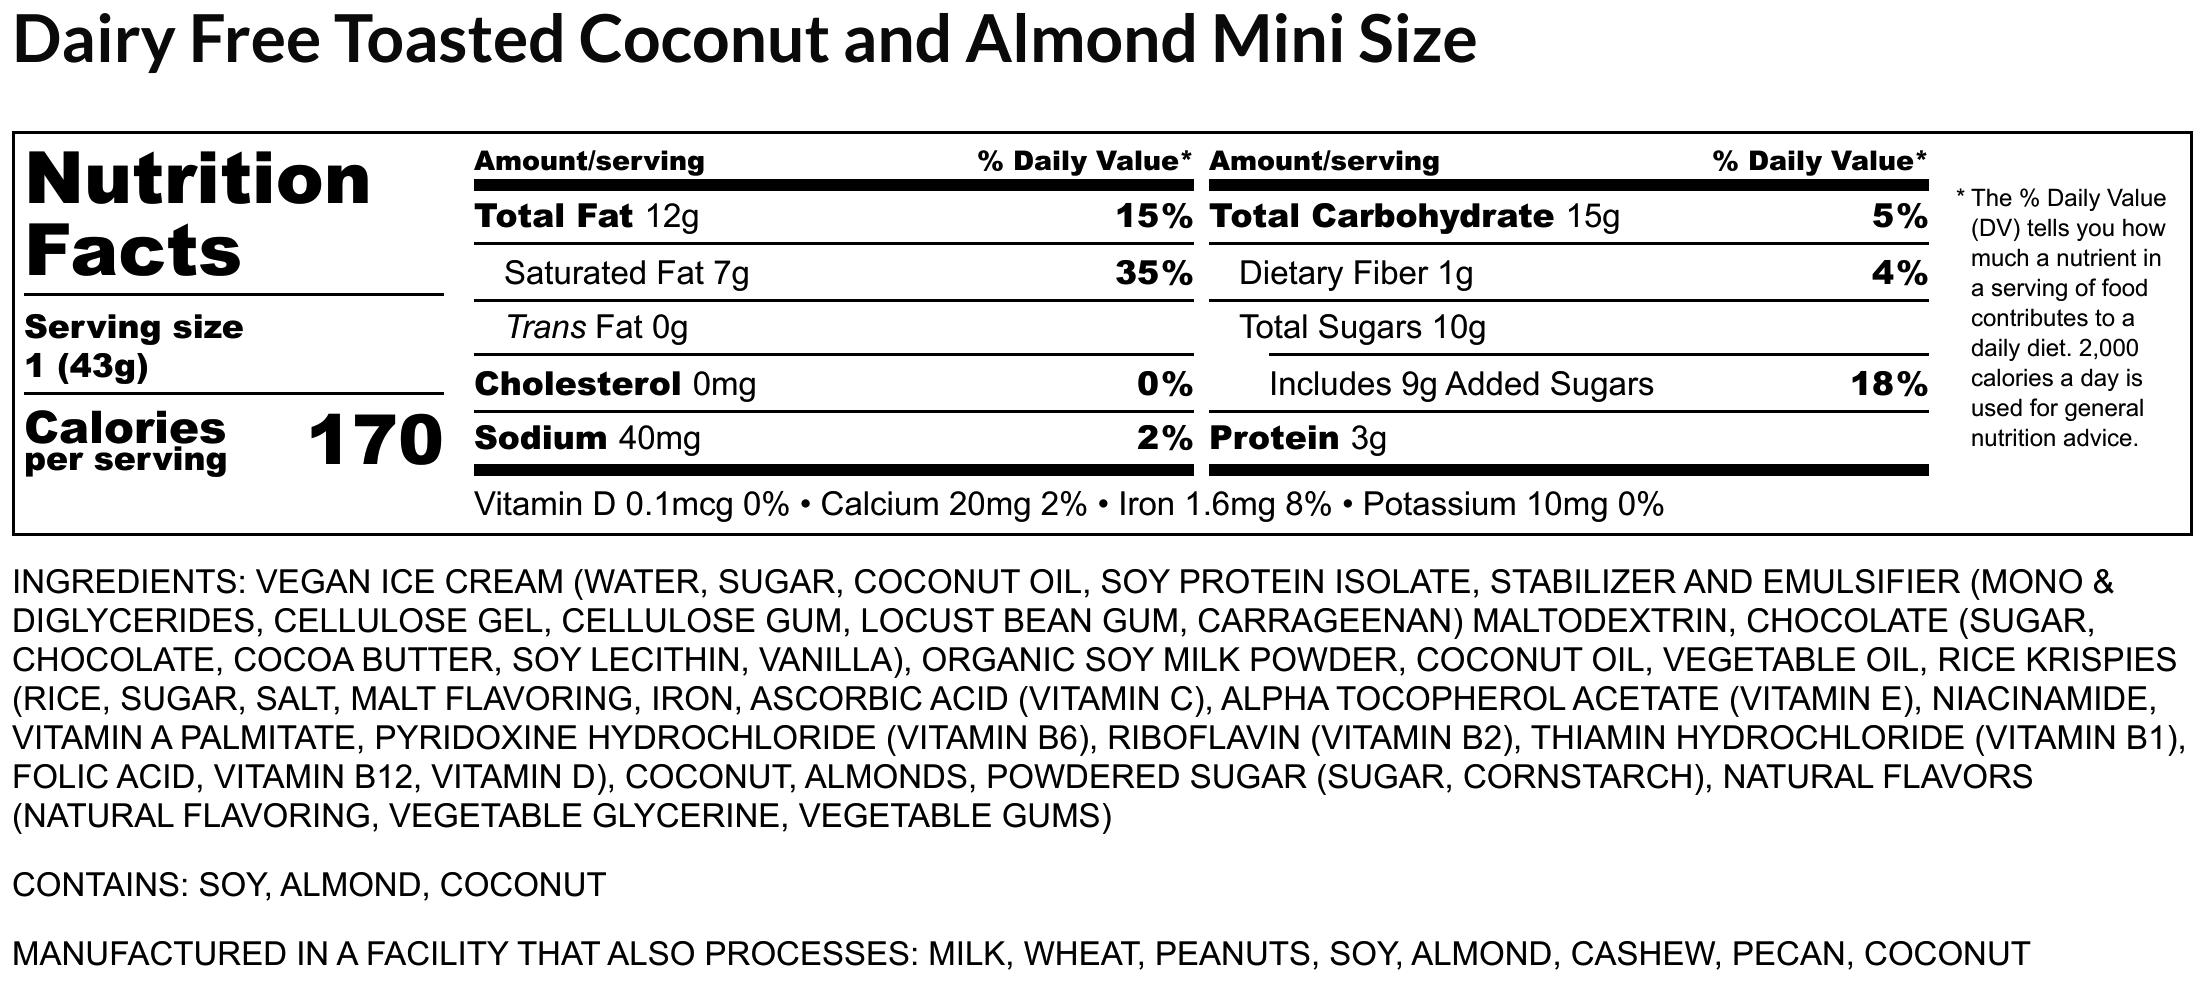 Dairy Free Toasted Coconut and Almond Mini Size